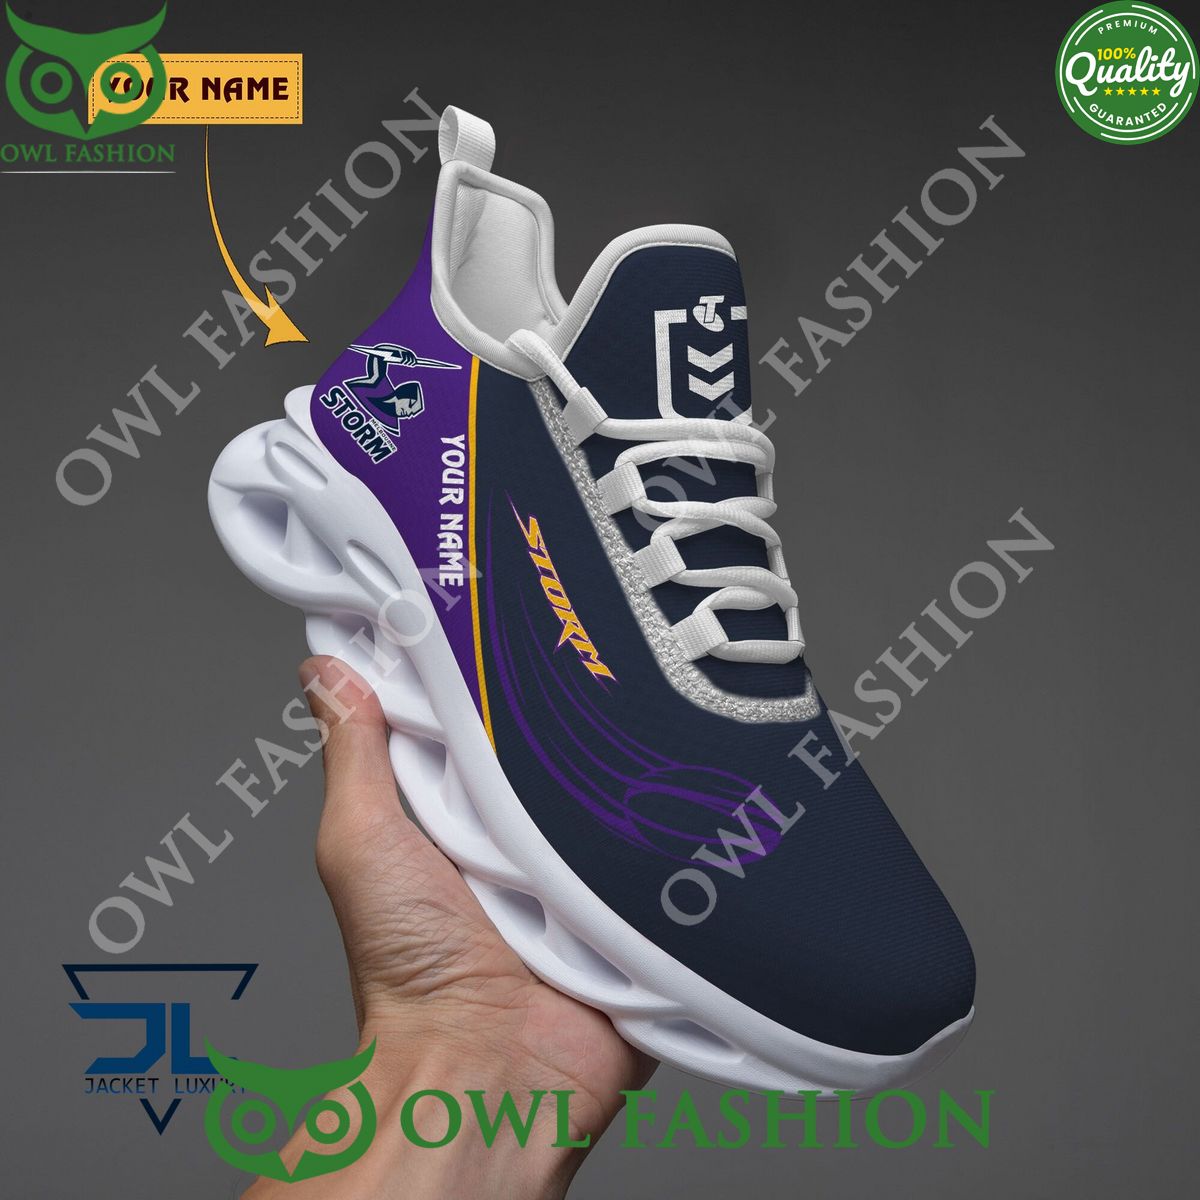 melbourne storm nrl rugby personalized limited max soul 1 lvRzA.jpg